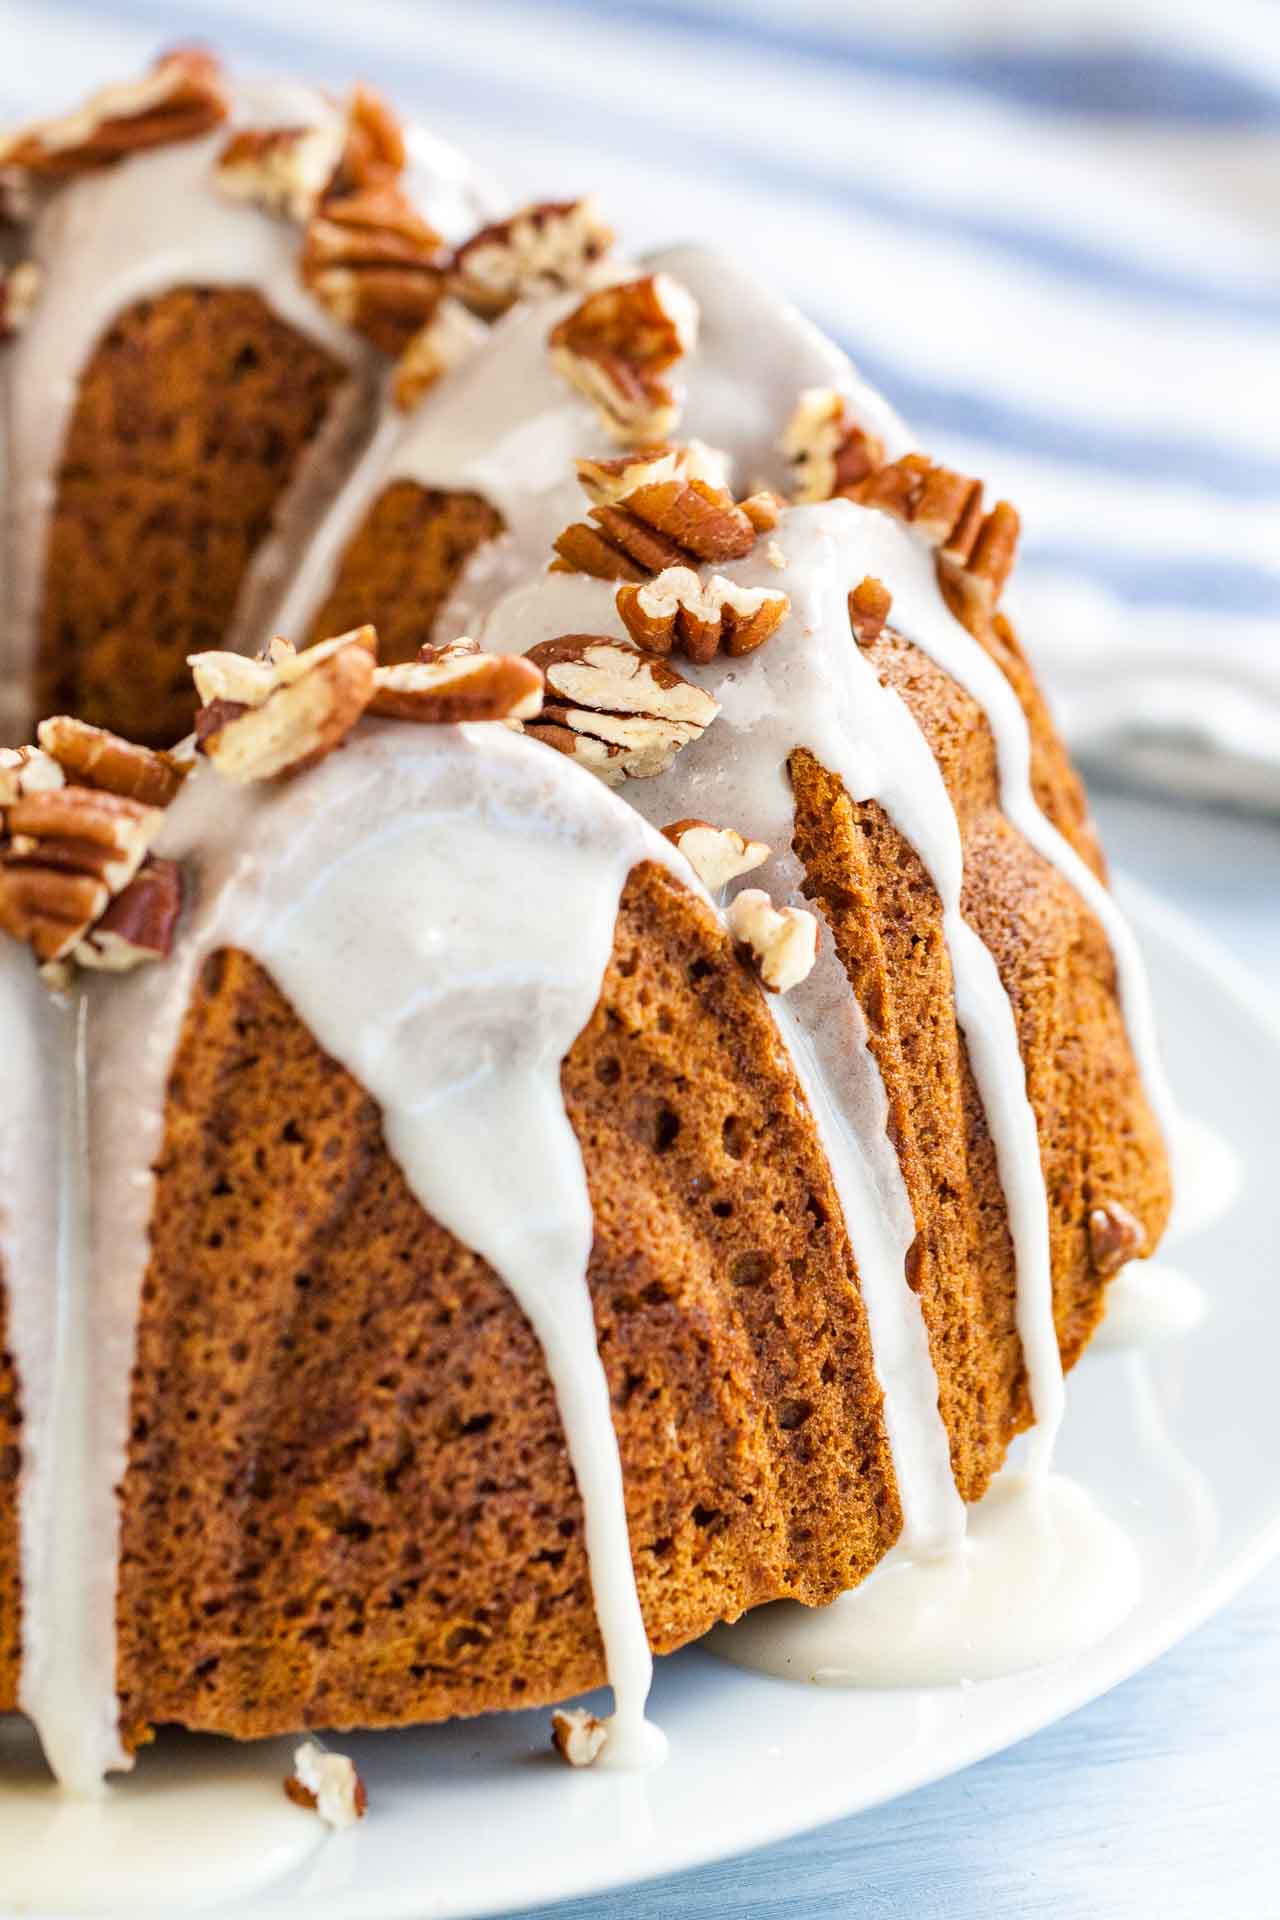 Close-up of a pumpkin bundt cake with maple glaze and toasted pecans on a white plate next to a white and blue dishtowel.